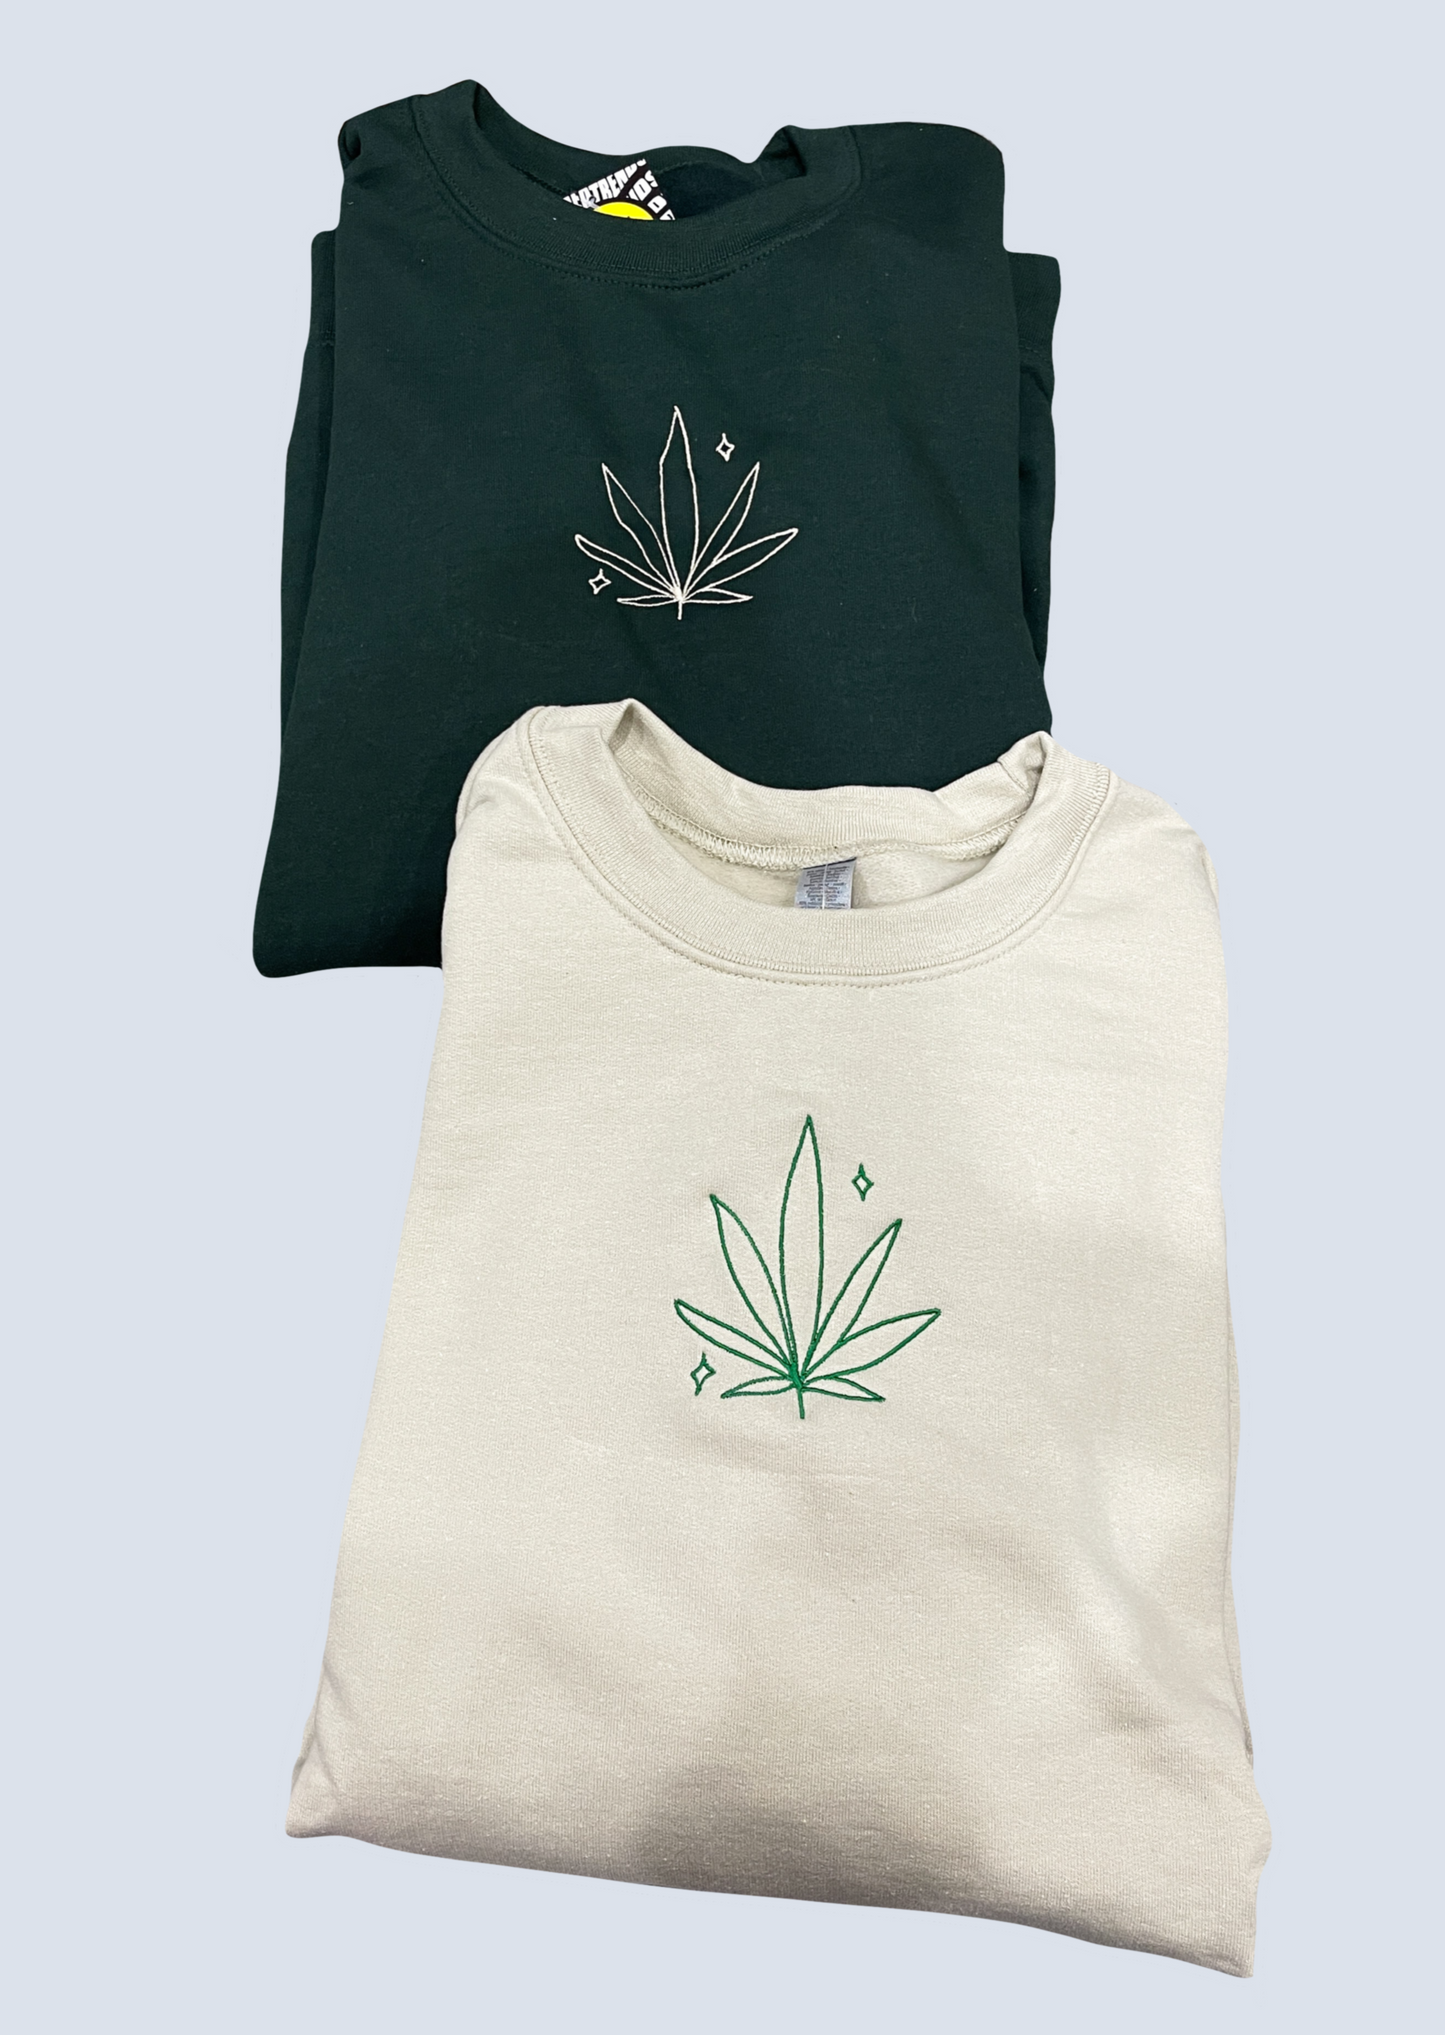 Weed Leaf Embroidered Matching Set